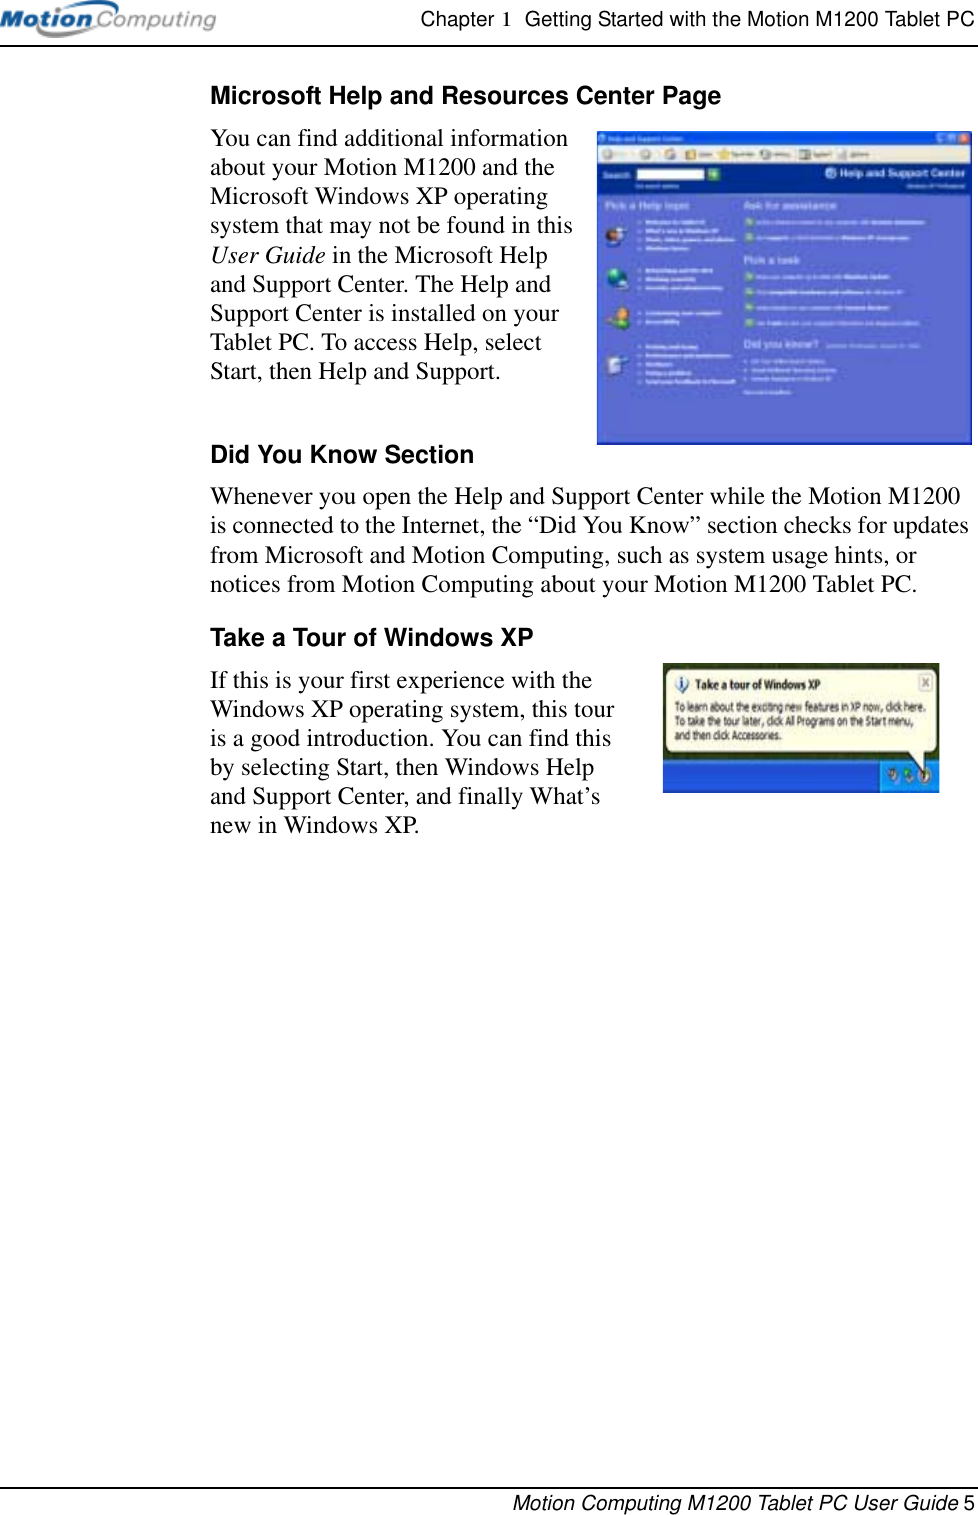 Chapter 1  Getting Started with the Motion M1200 Tablet PCMotion Computing M1200 Tablet PC User Guide 5Microsoft Help and Resources Center PageYou can find additional information about your Motion M1200 and the Microsoft Windows XP operating system that may not be found in this User Guide in the Microsoft Help and Support Center. The Help and Support Center is installed on your Tablet PC. To access Help, select Start, then Help and Support.Did You Know SectionWhenever you open the Help and Support Center while the Motion M1200 is connected to the Internet, the “Did You Know” section checks for updates from Microsoft and Motion Computing, such as system usage hints, or notices from Motion Computing about your Motion M1200 Tablet PC.Take a Tour of Windows XPIf this is your first experience with the Windows XP operating system, this tour is a good introduction. You can find this by selecting Start, then Windows Help and Support Center, and finally What’s new in Windows XP. 